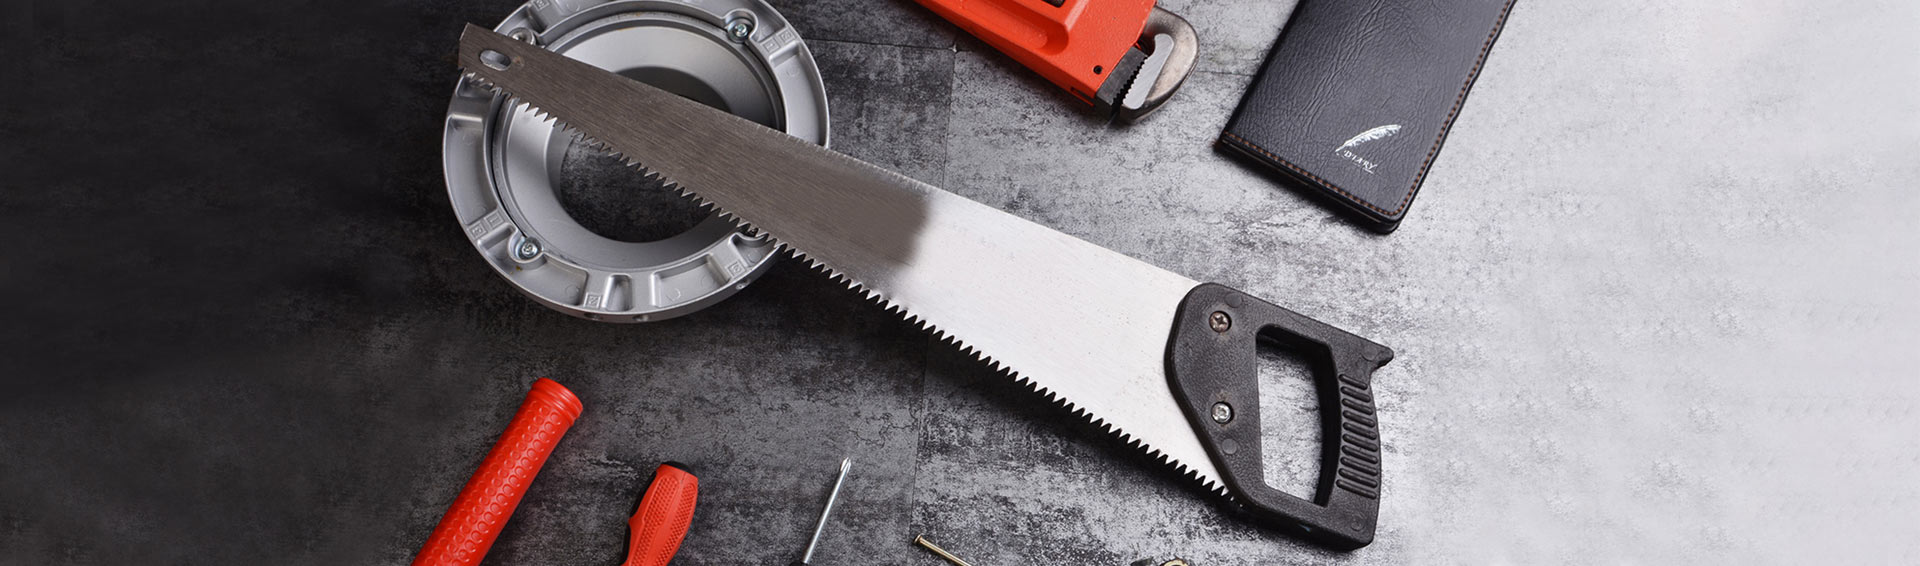 9 best jigsaw tools that will fulfil your DIY needs